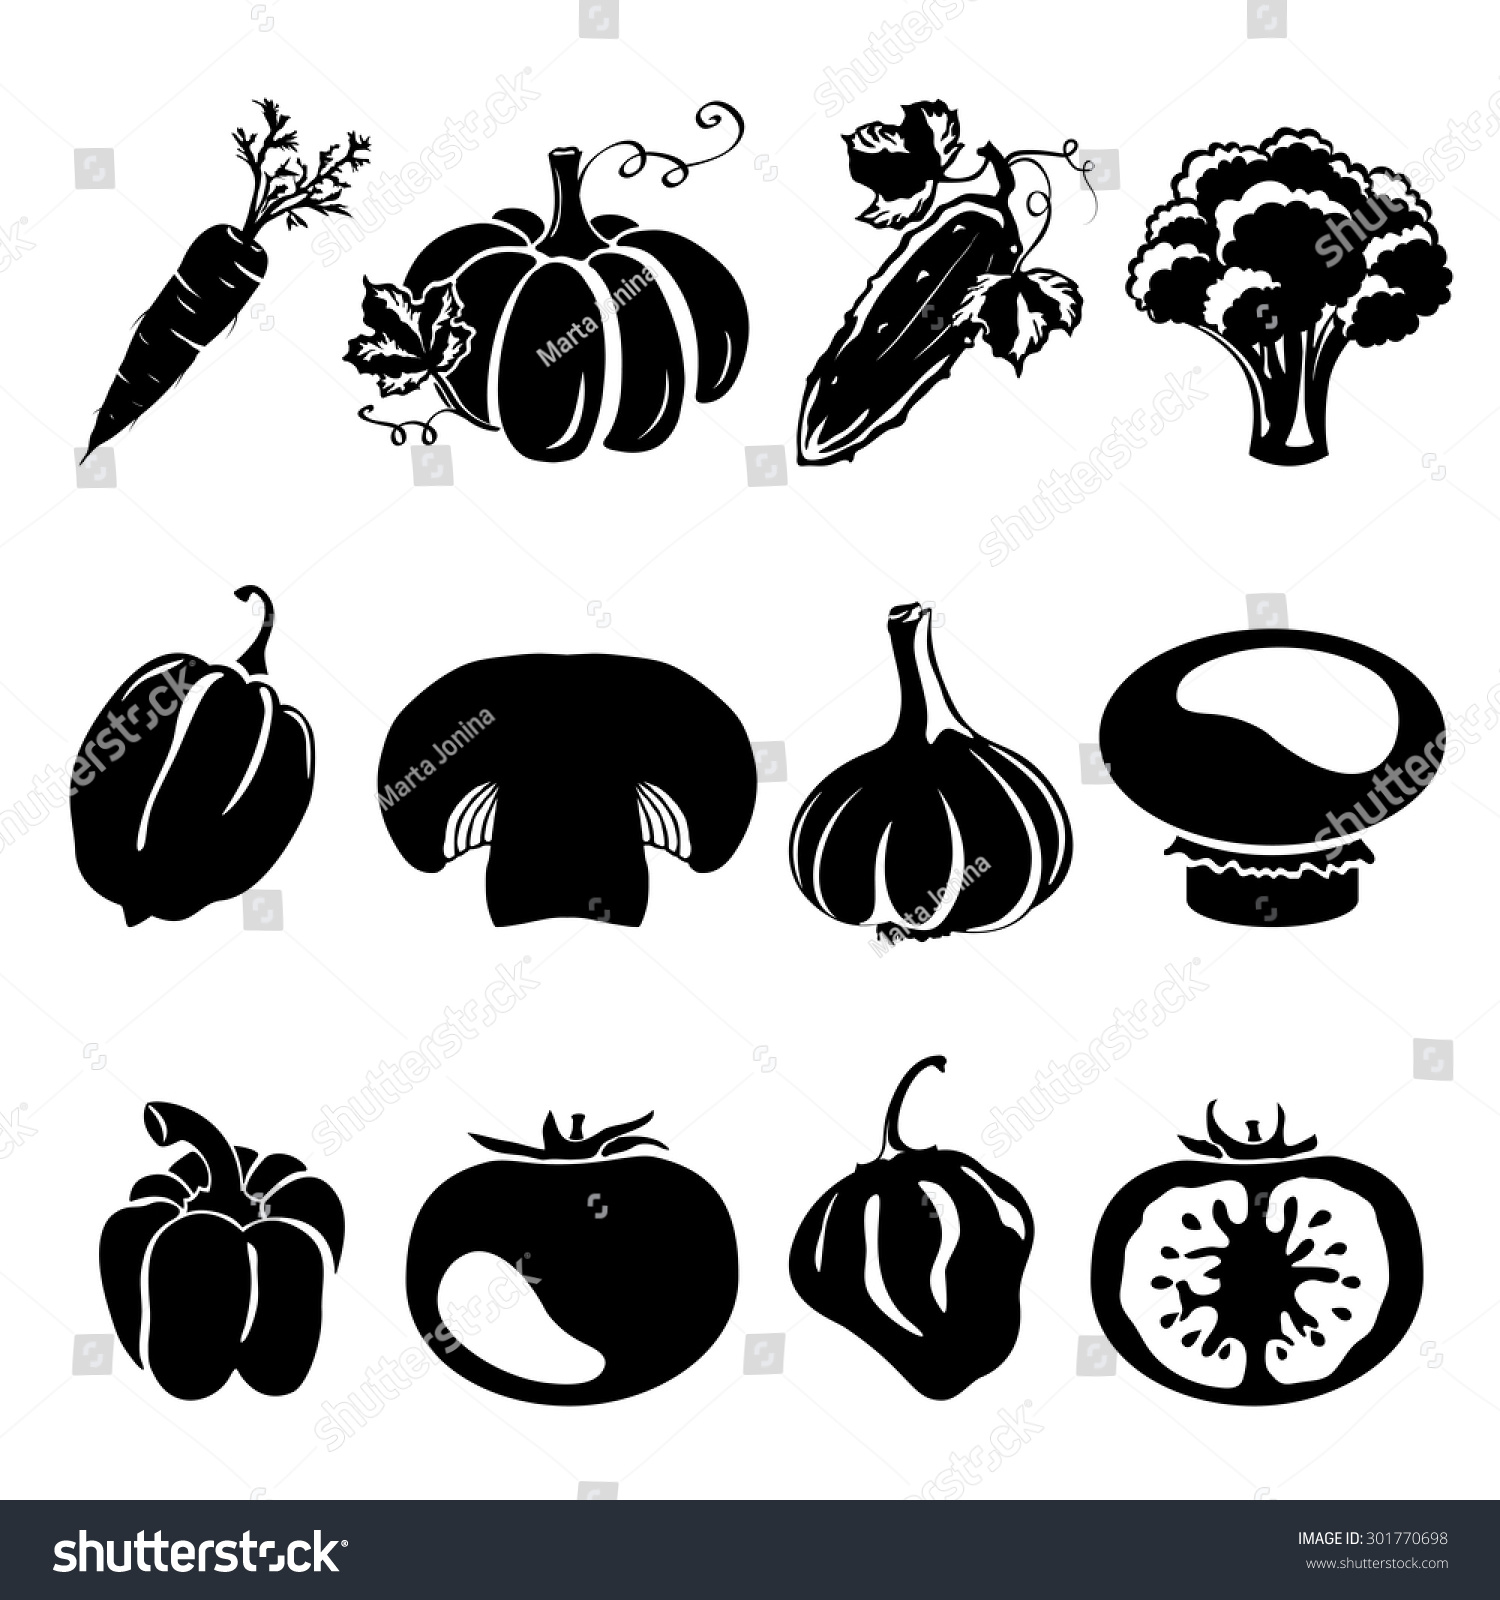 Sketch Style Silhouettes Different Vegetables Cucumber Stock Vector ...